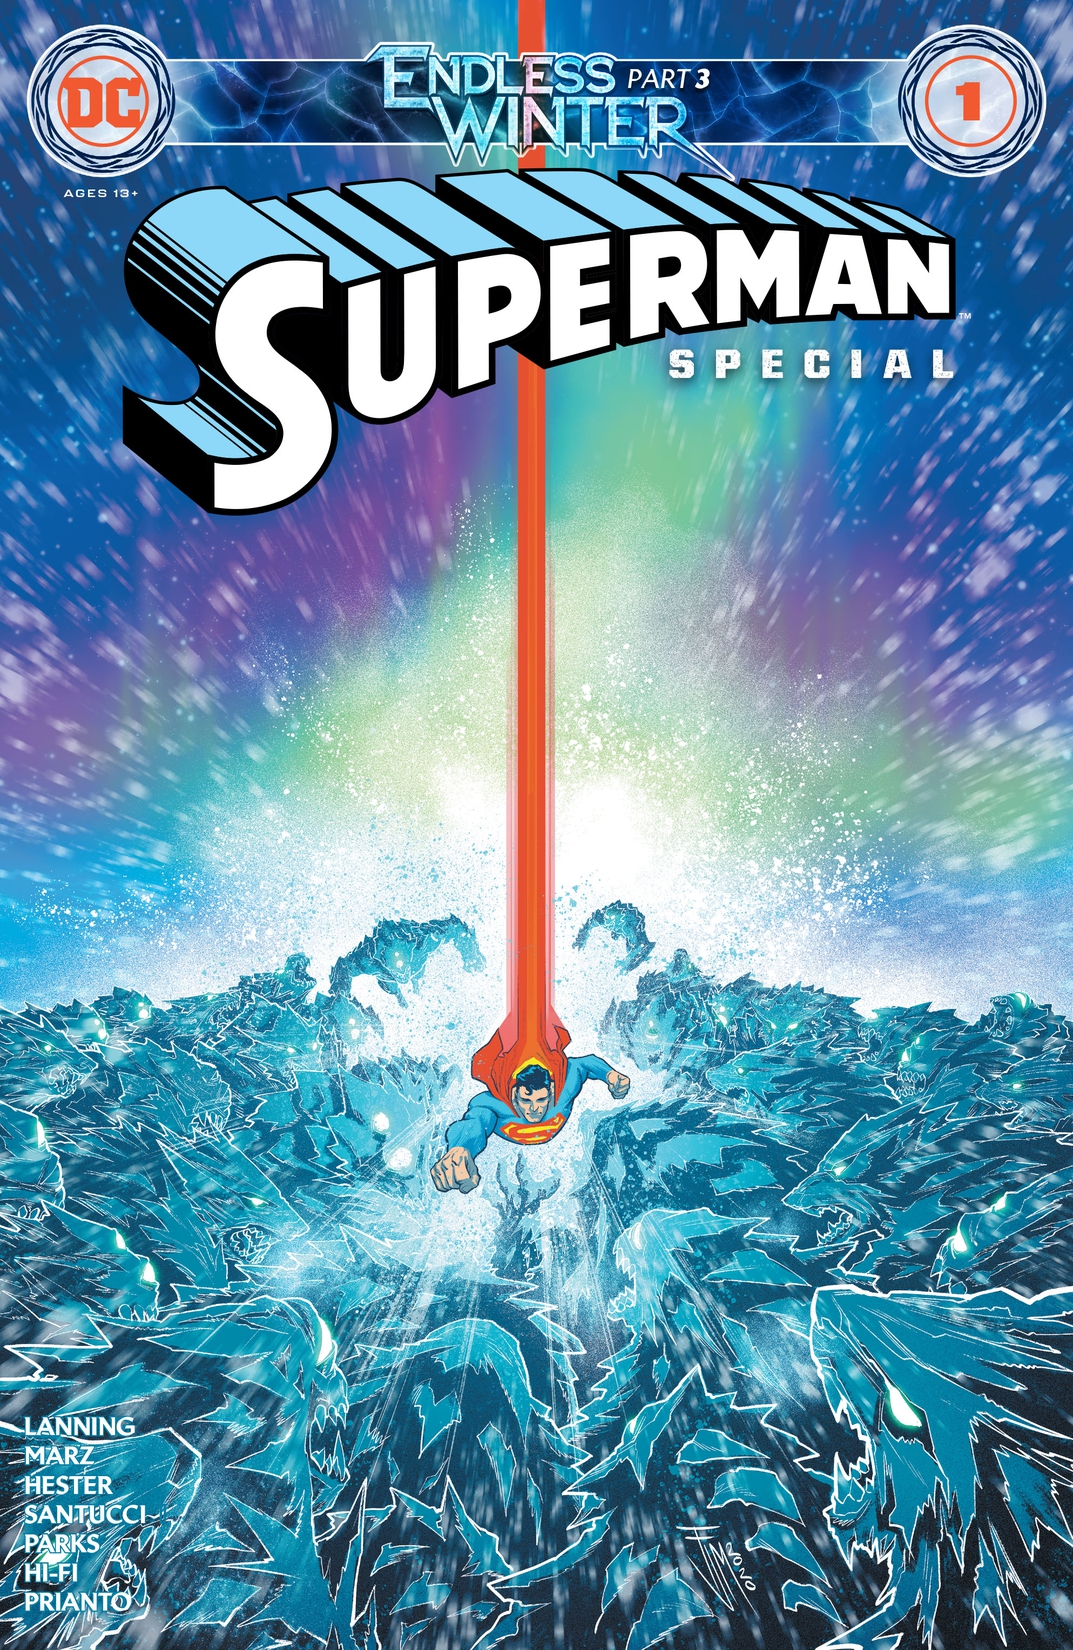 Superman: Endless Winter Special #1 preview images